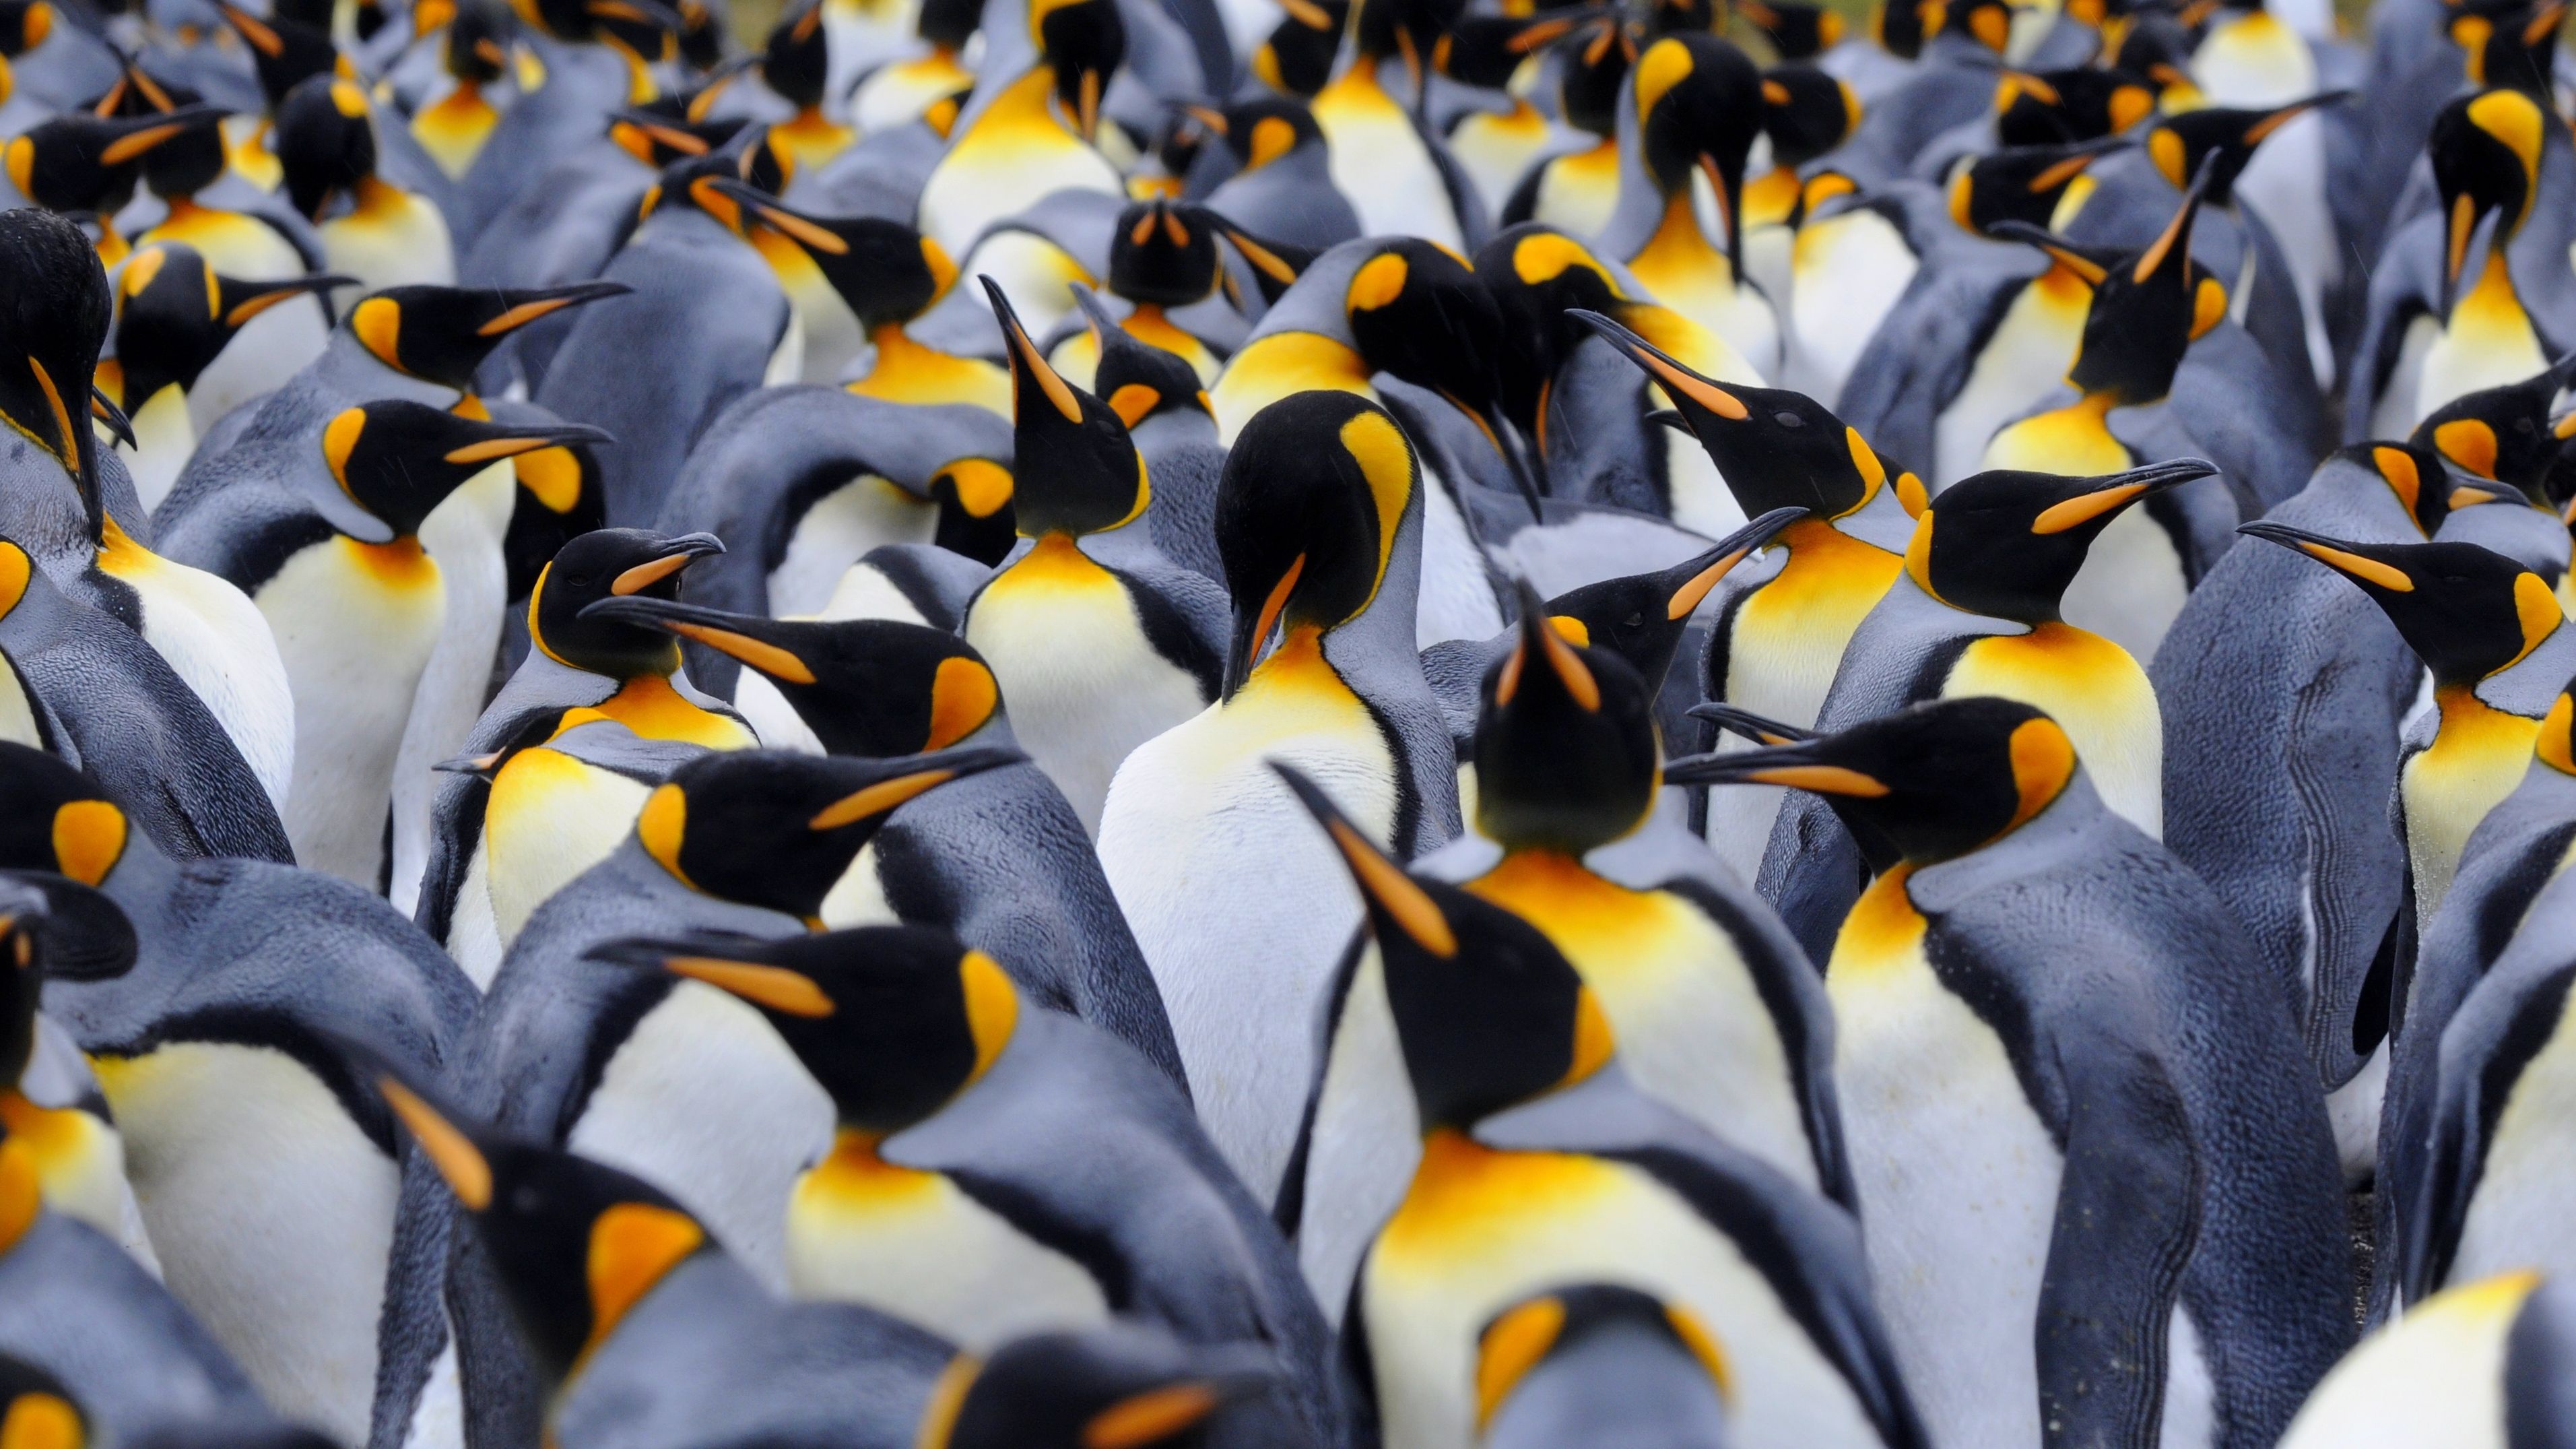 30 Absolutely Delightful Facts You Never Knew About Penguins